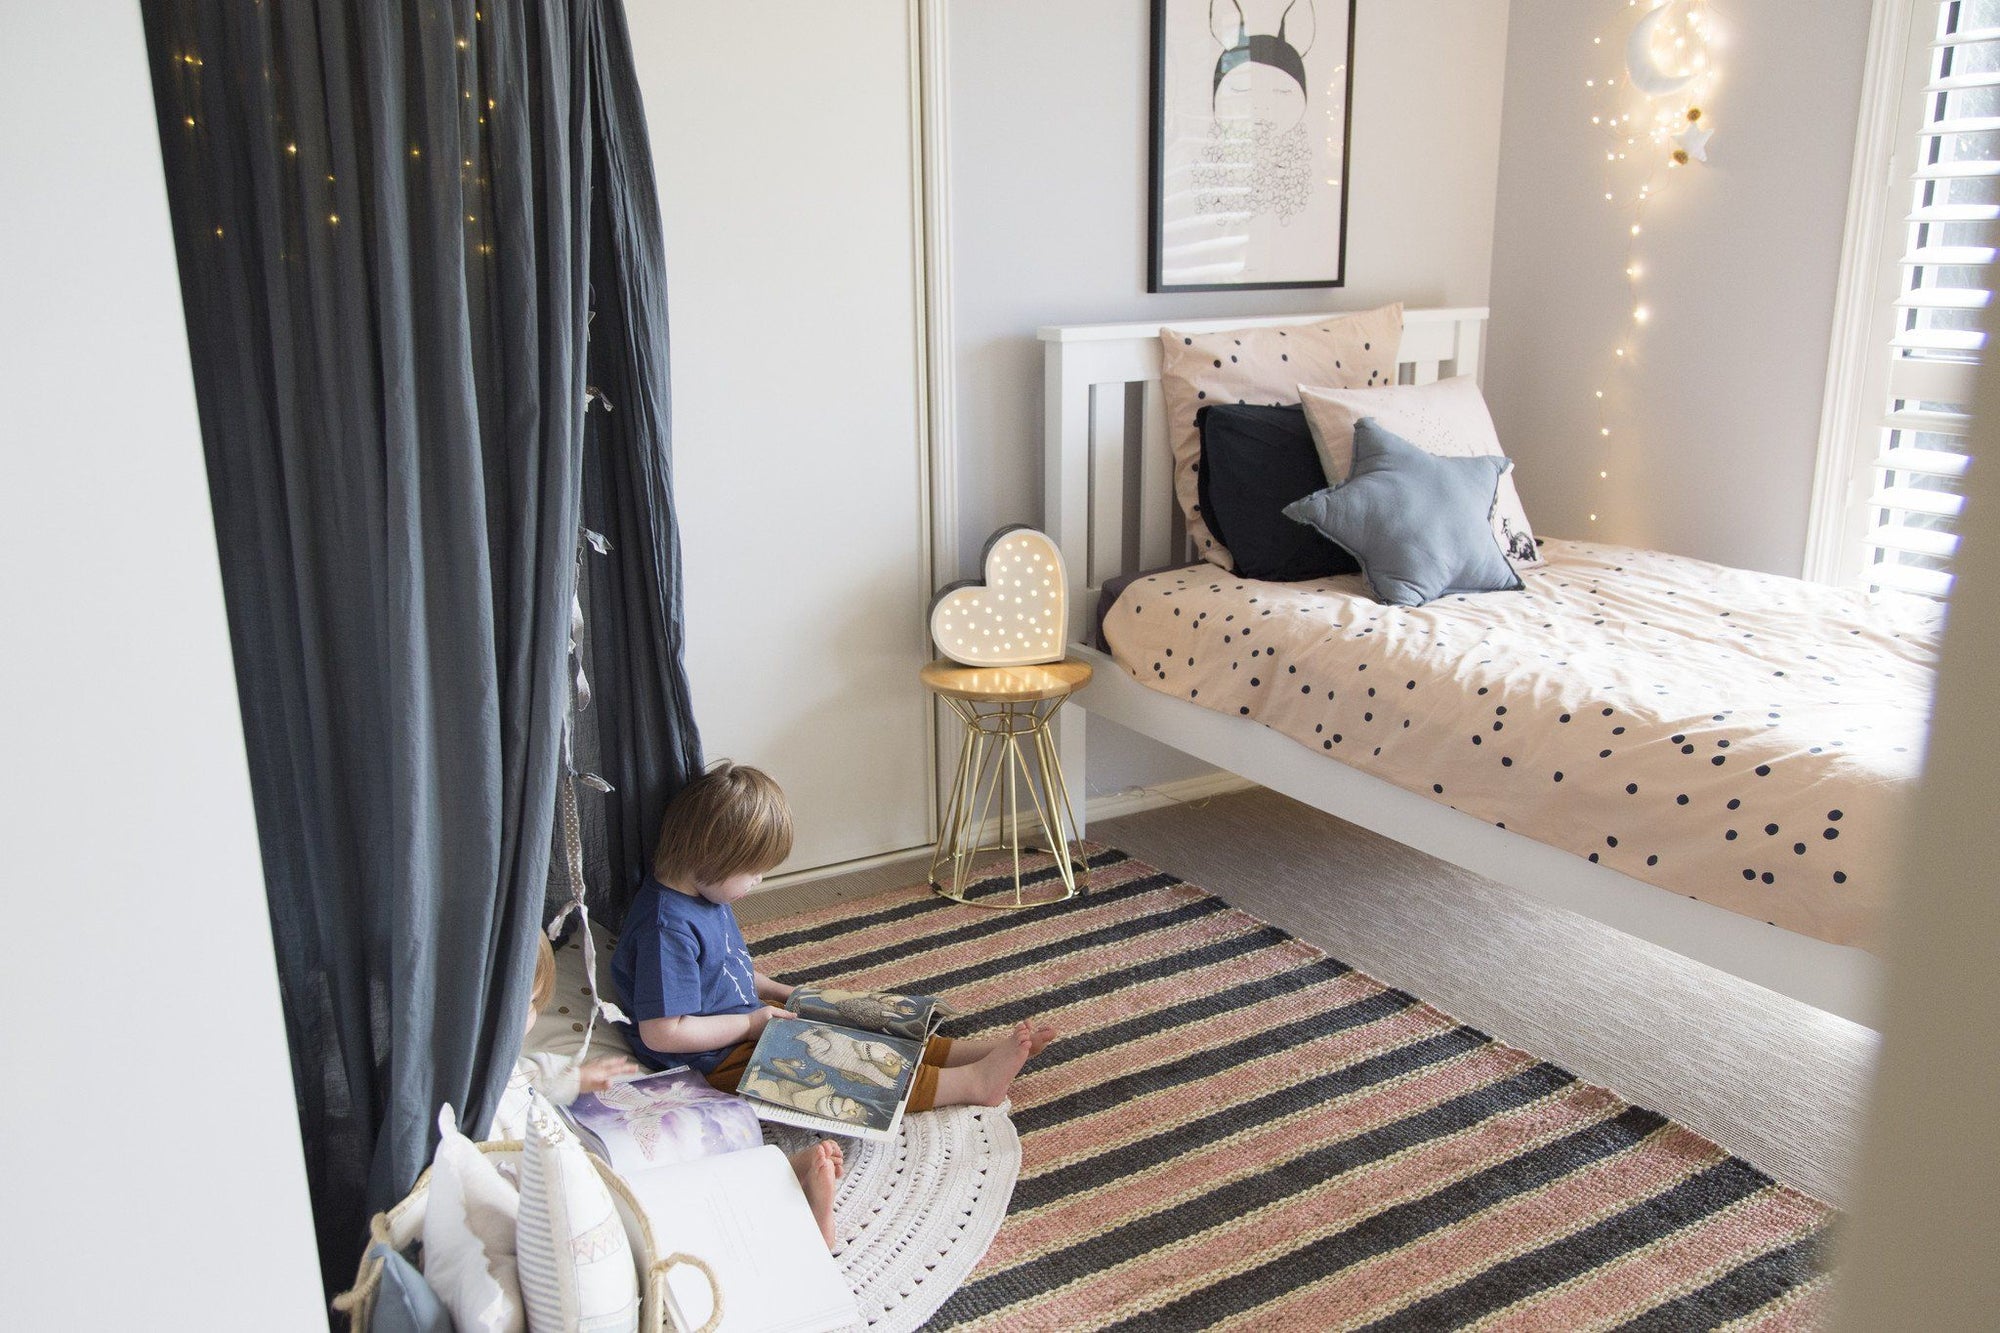 Bedroom inspiration created by Petite Vintage Interiors